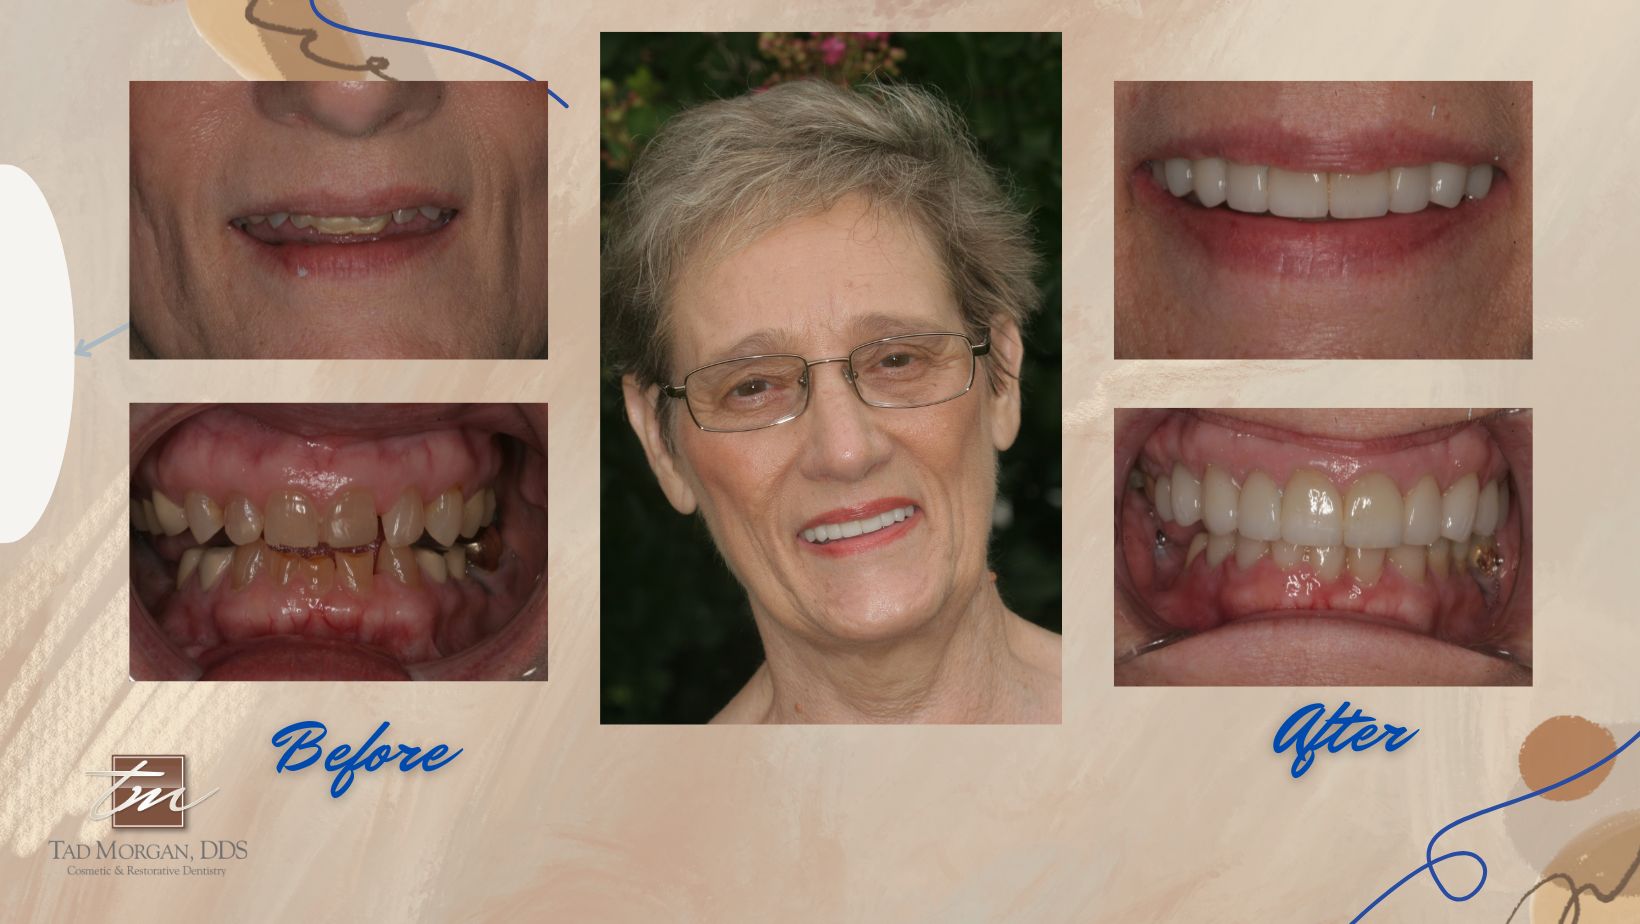 Before and after photos of a woman's teeth.